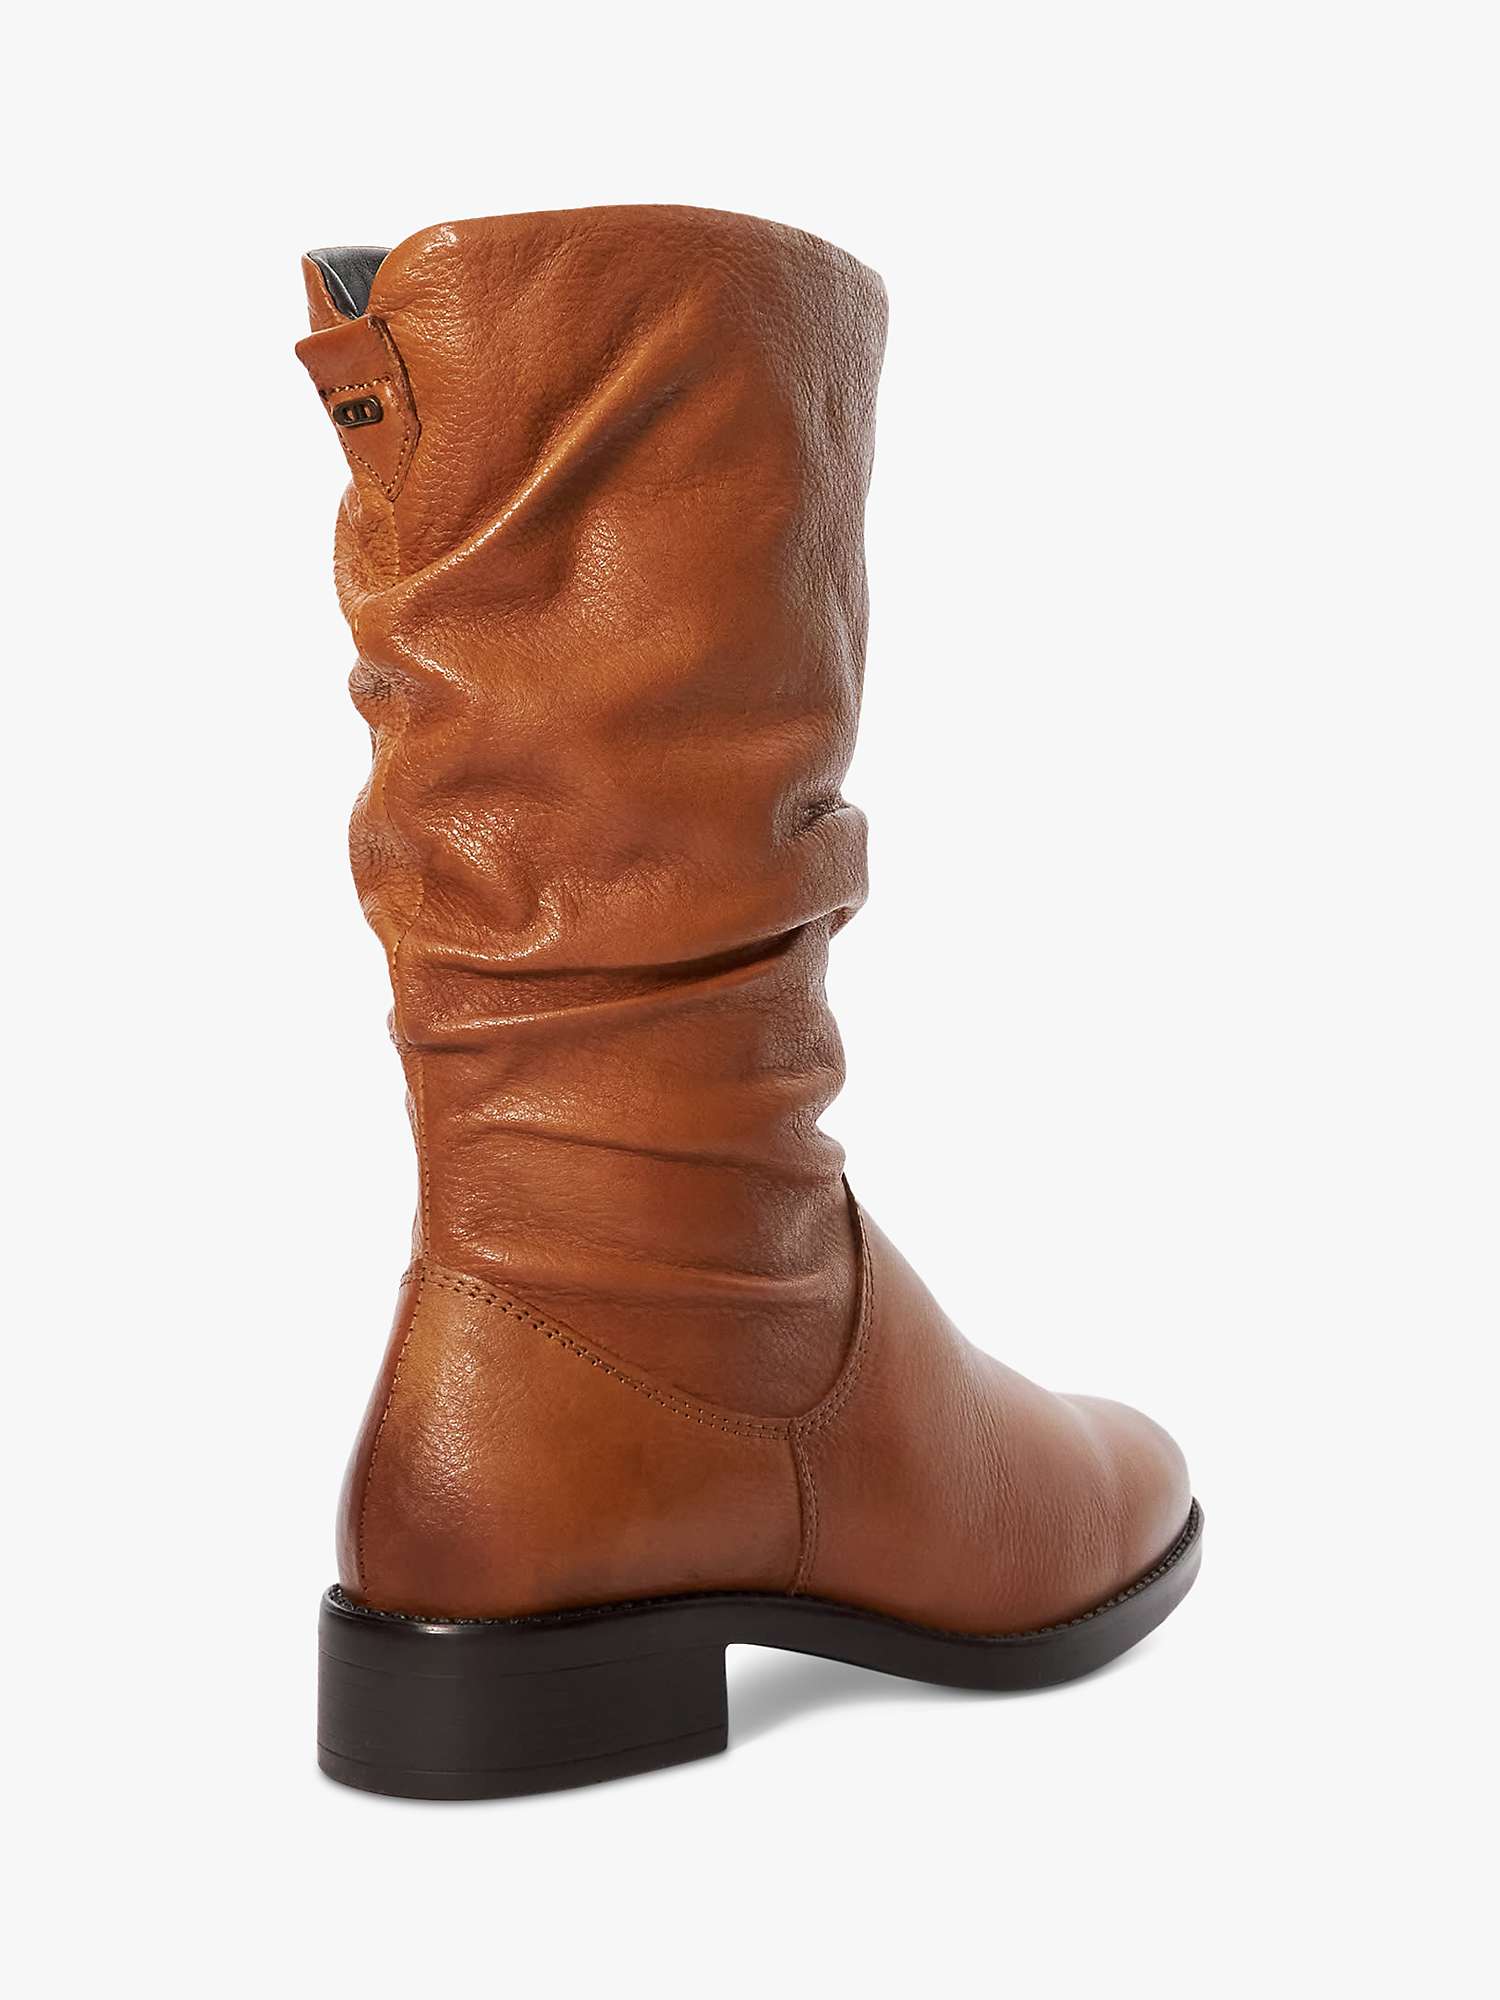 Buy Dune Tyling Leather Ruched Calf Boots Online at johnlewis.com